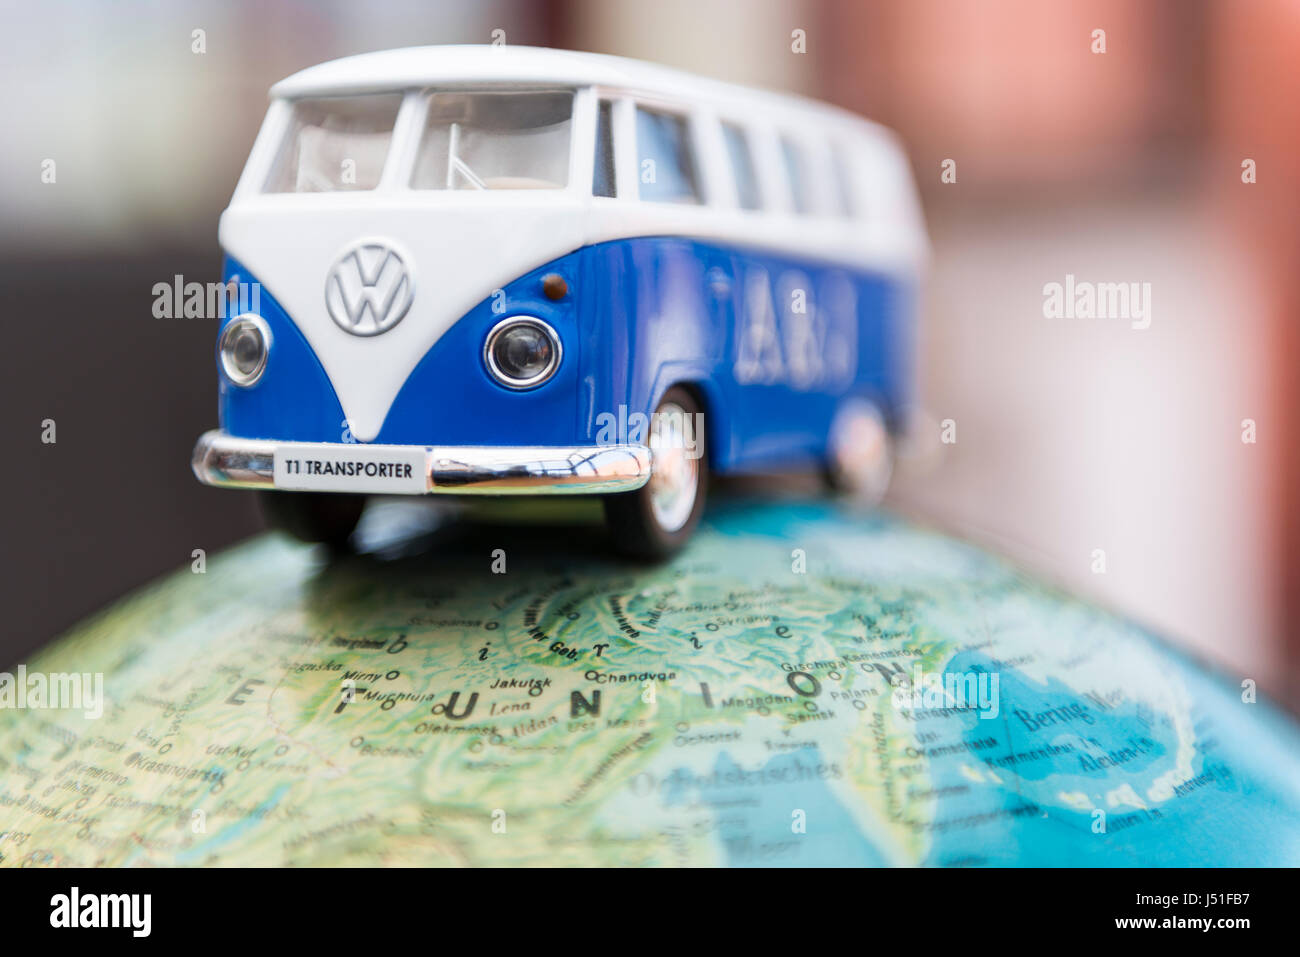 Concept of a world trip with globe and Volkswagen T1 Transporter van crossing the planet Stock Photo